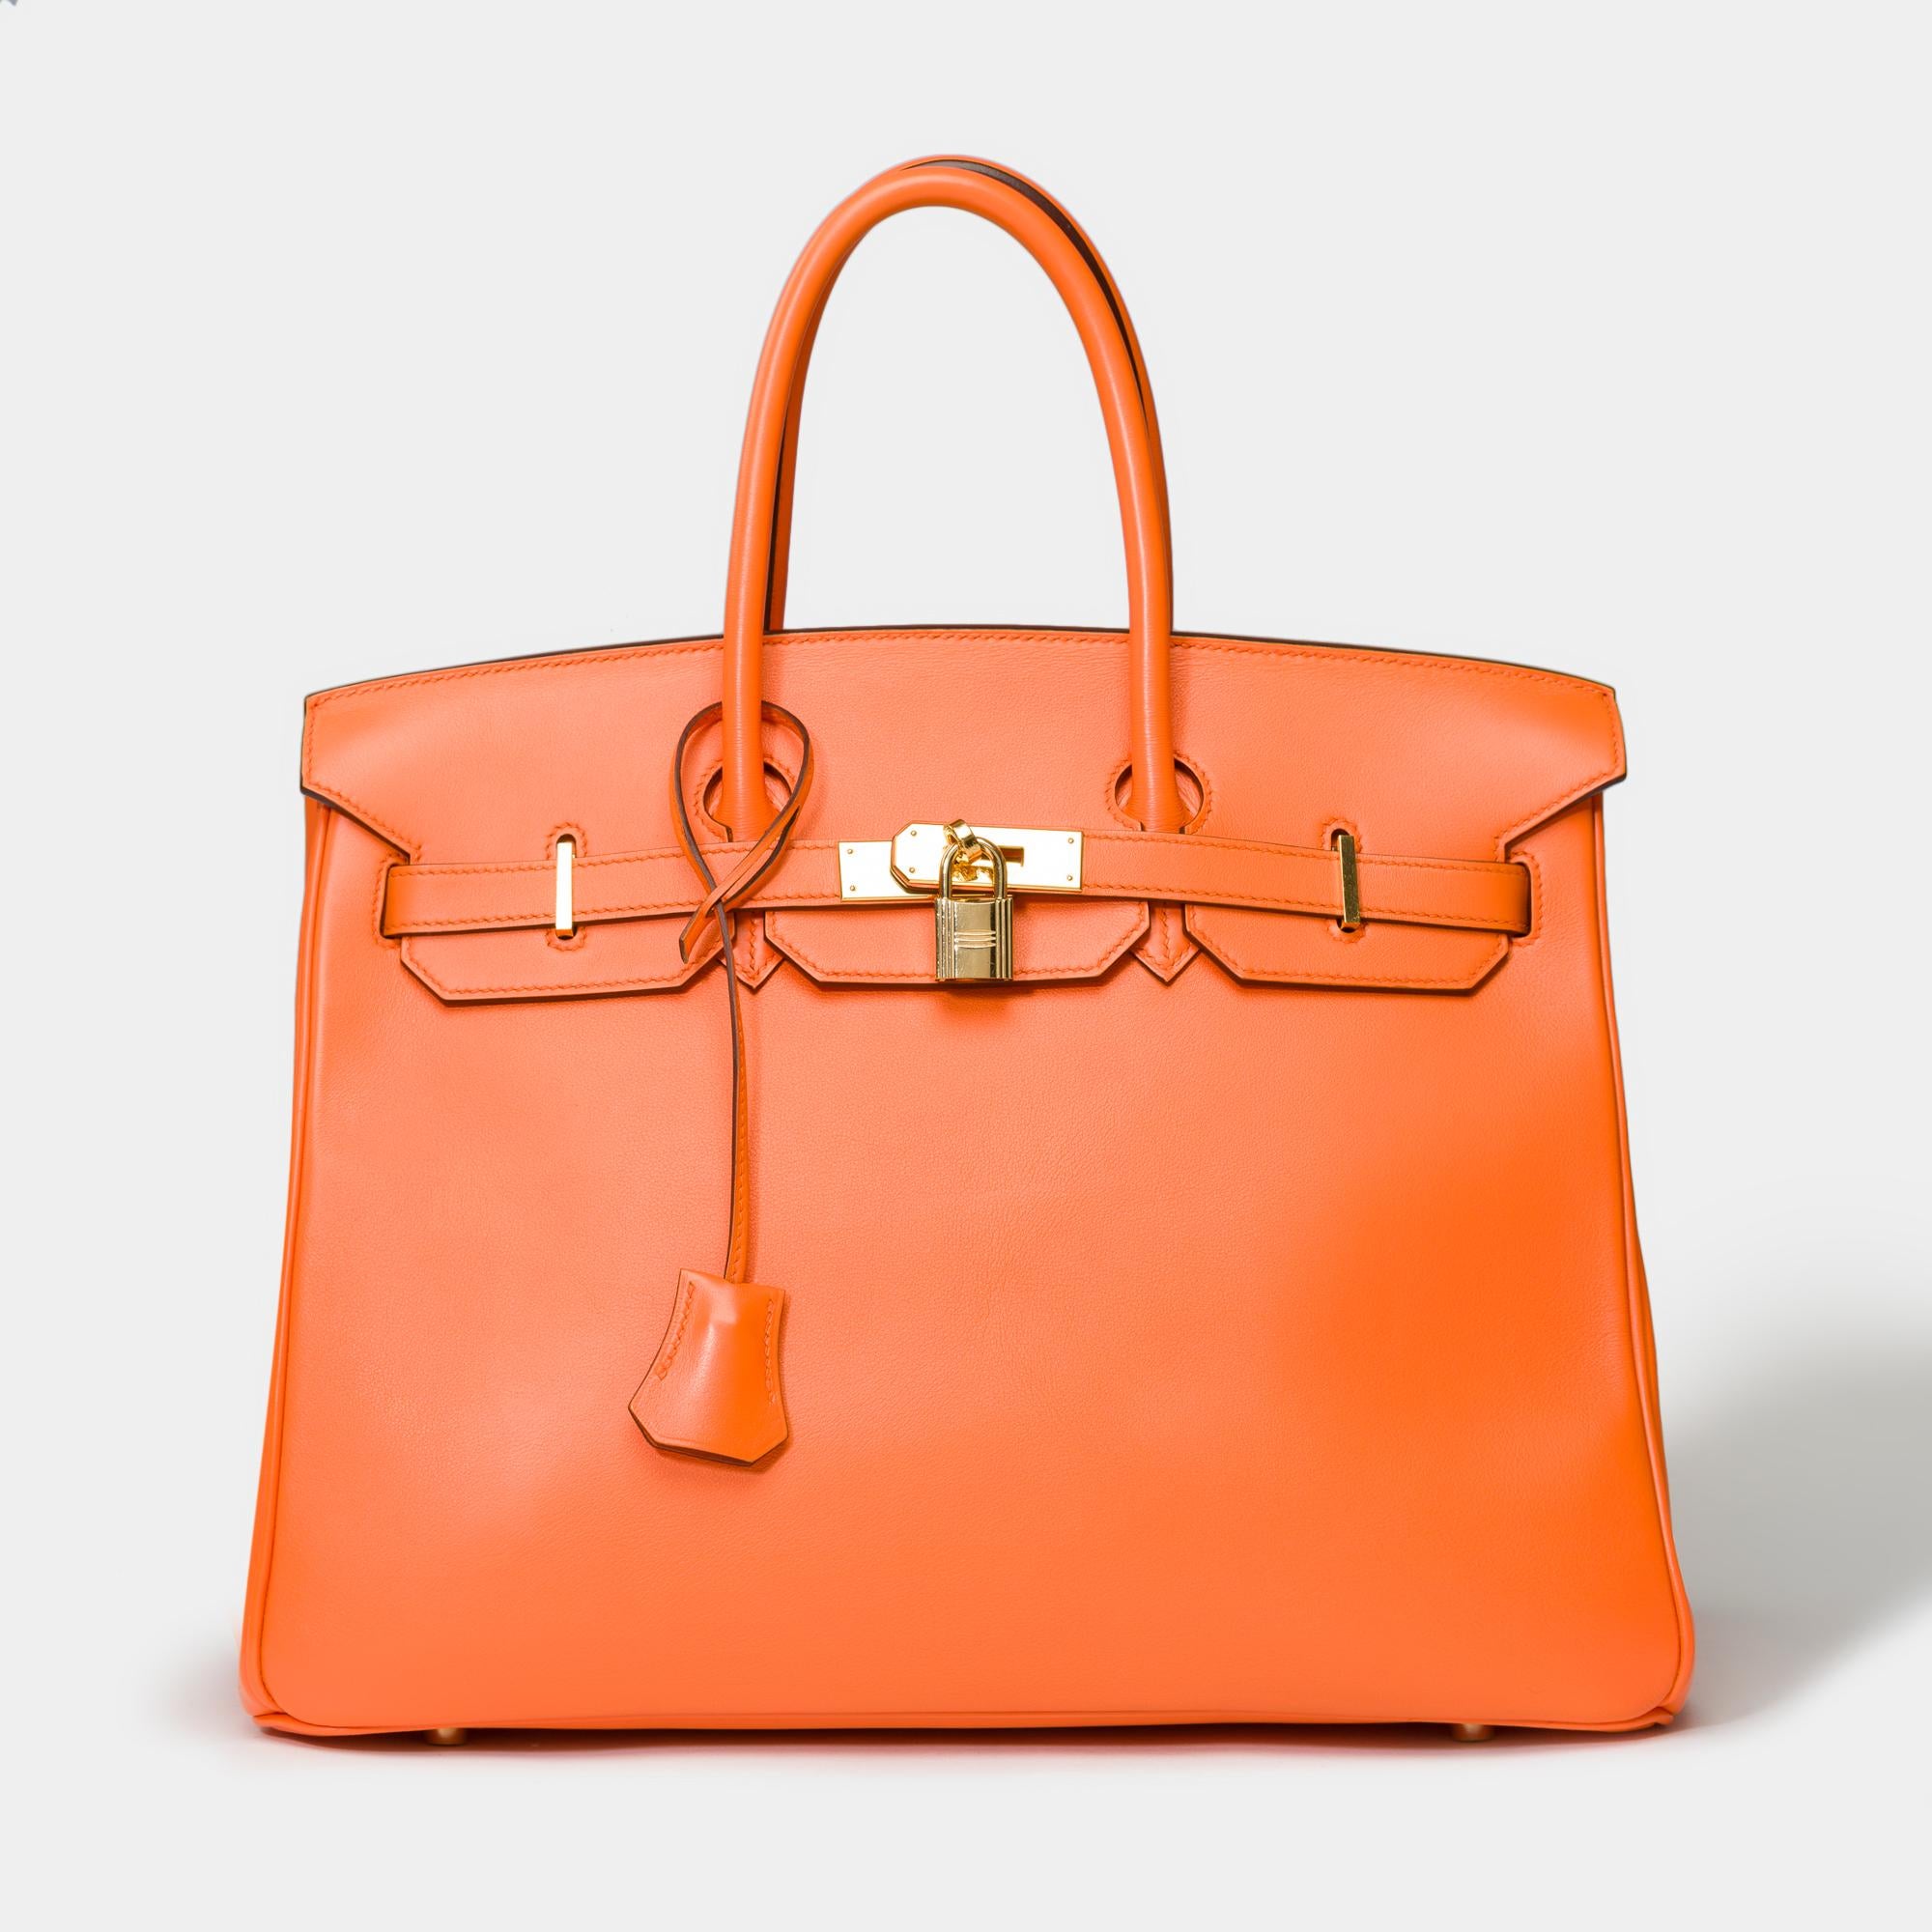 Amazing​​​ ​​​Birkin​​​ ​​​35​​​ ​​​handbag​​​ ​​​in​​​ ​​Orange​ ​​Swift​ ​calf​​ ​​​leather​​​ ​​​,​​​ ​​​gold-plated​​​ ​​​metal​​​ ​​​trim,​​​ ​​​double​​​ ​​​handle​​​ ​​in​​ ​​orange​​ ​​​for​​​ ​​​a​​ ​​hand​​​ ​​​Carry

Flap​​​